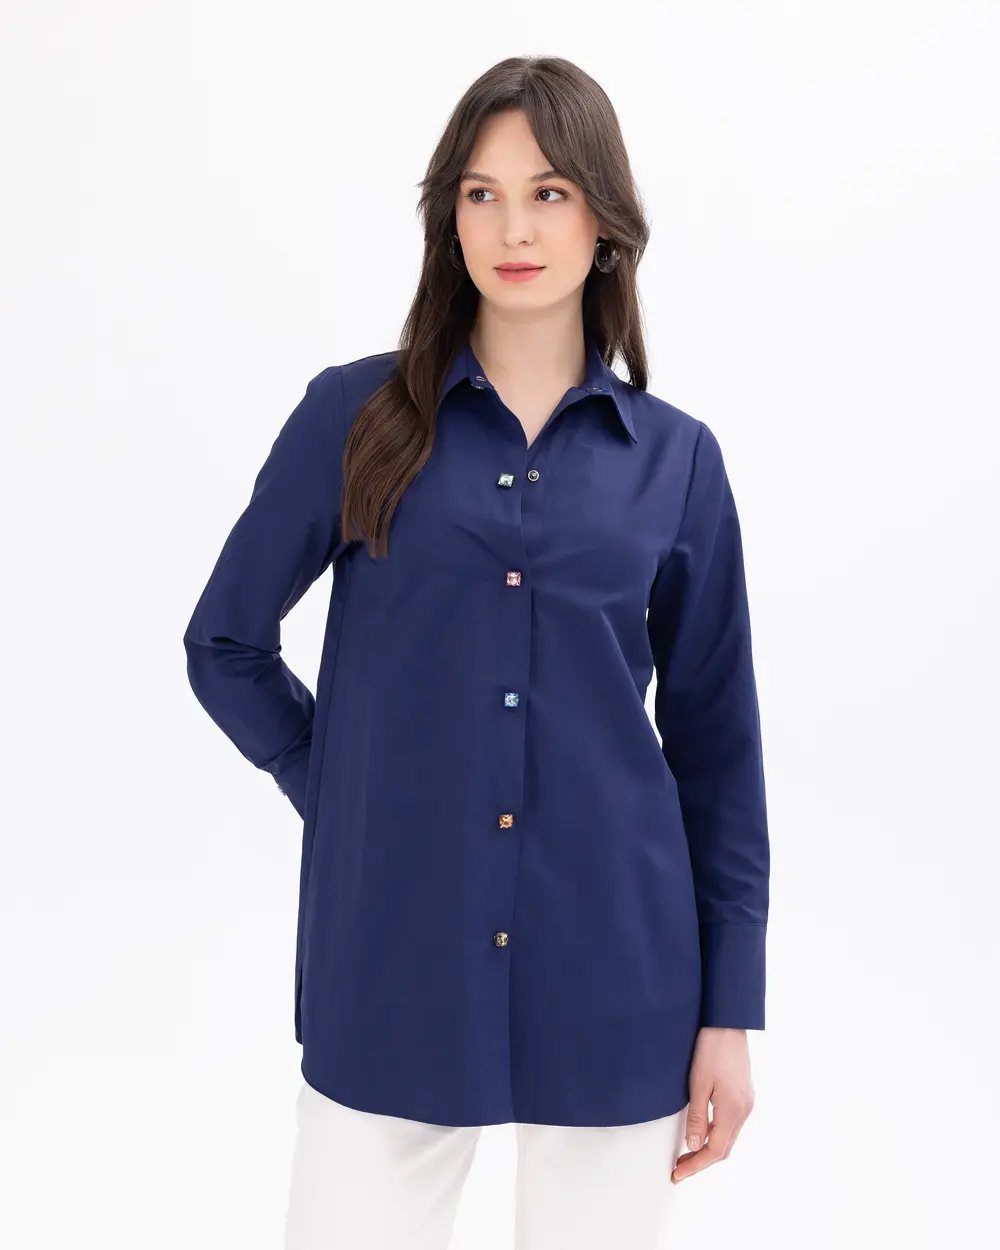 Classic Cut Shirt with Snap Buttons